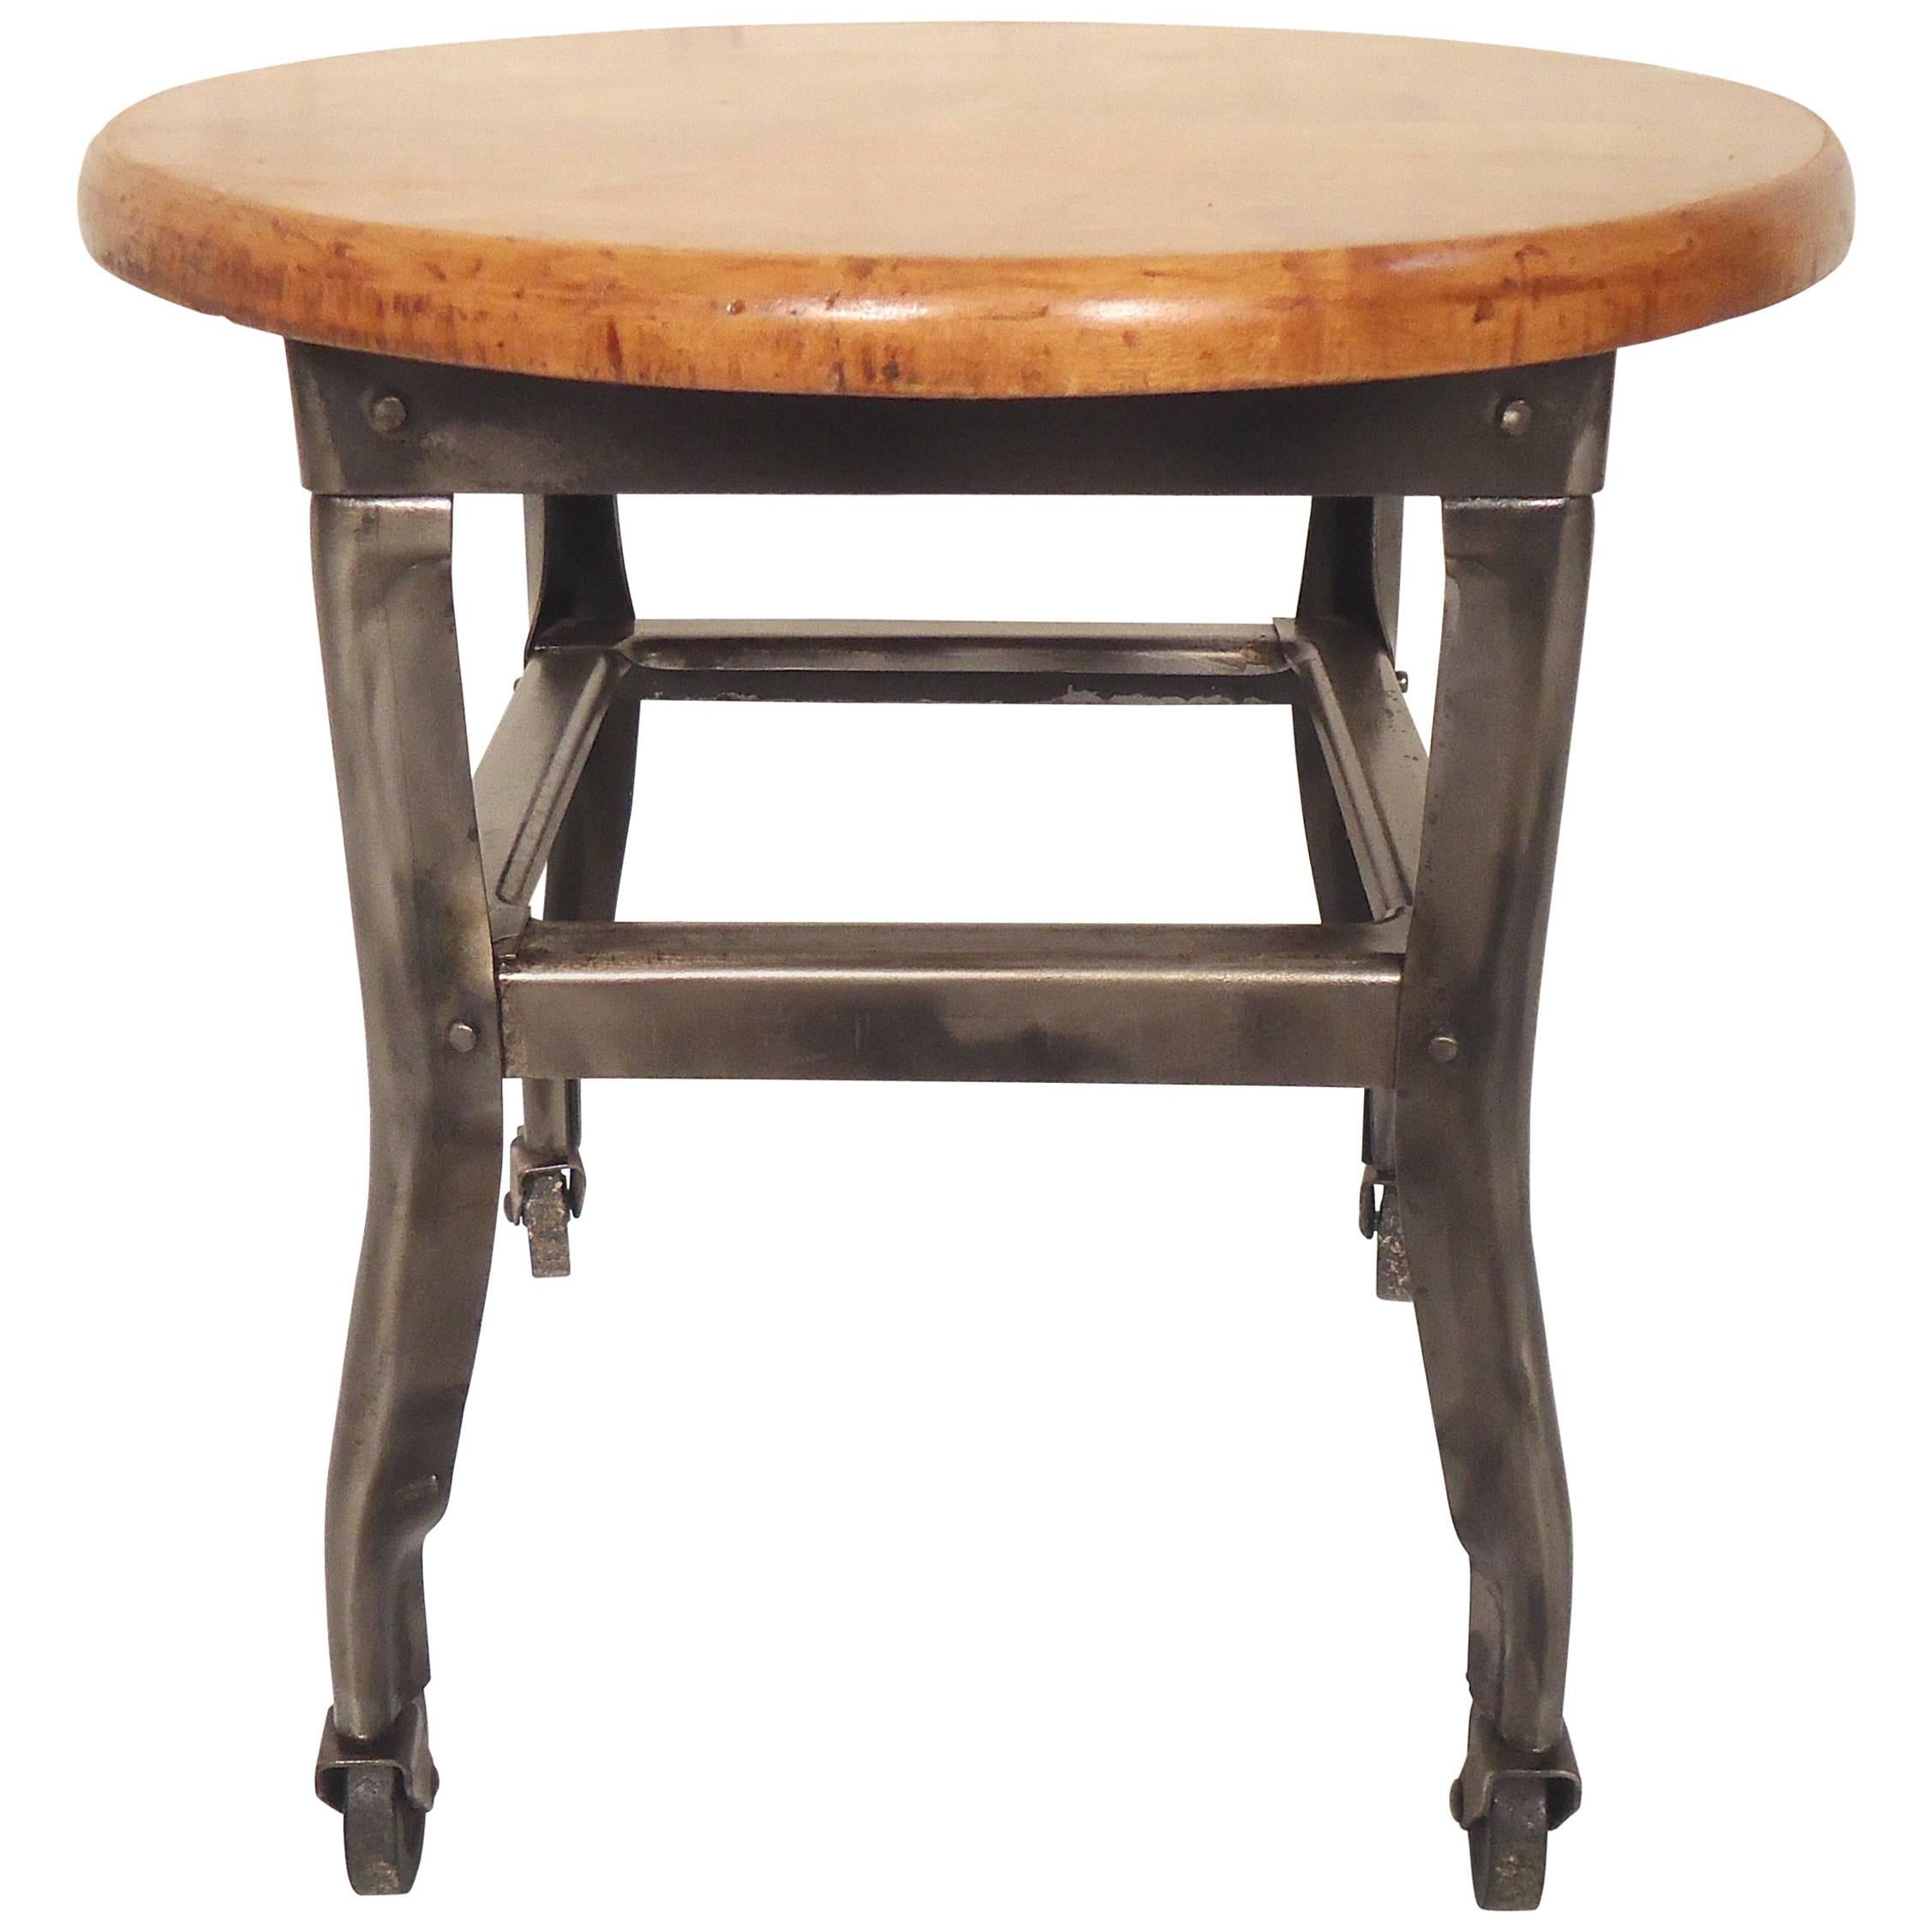 Small Industrial Stool For Sale